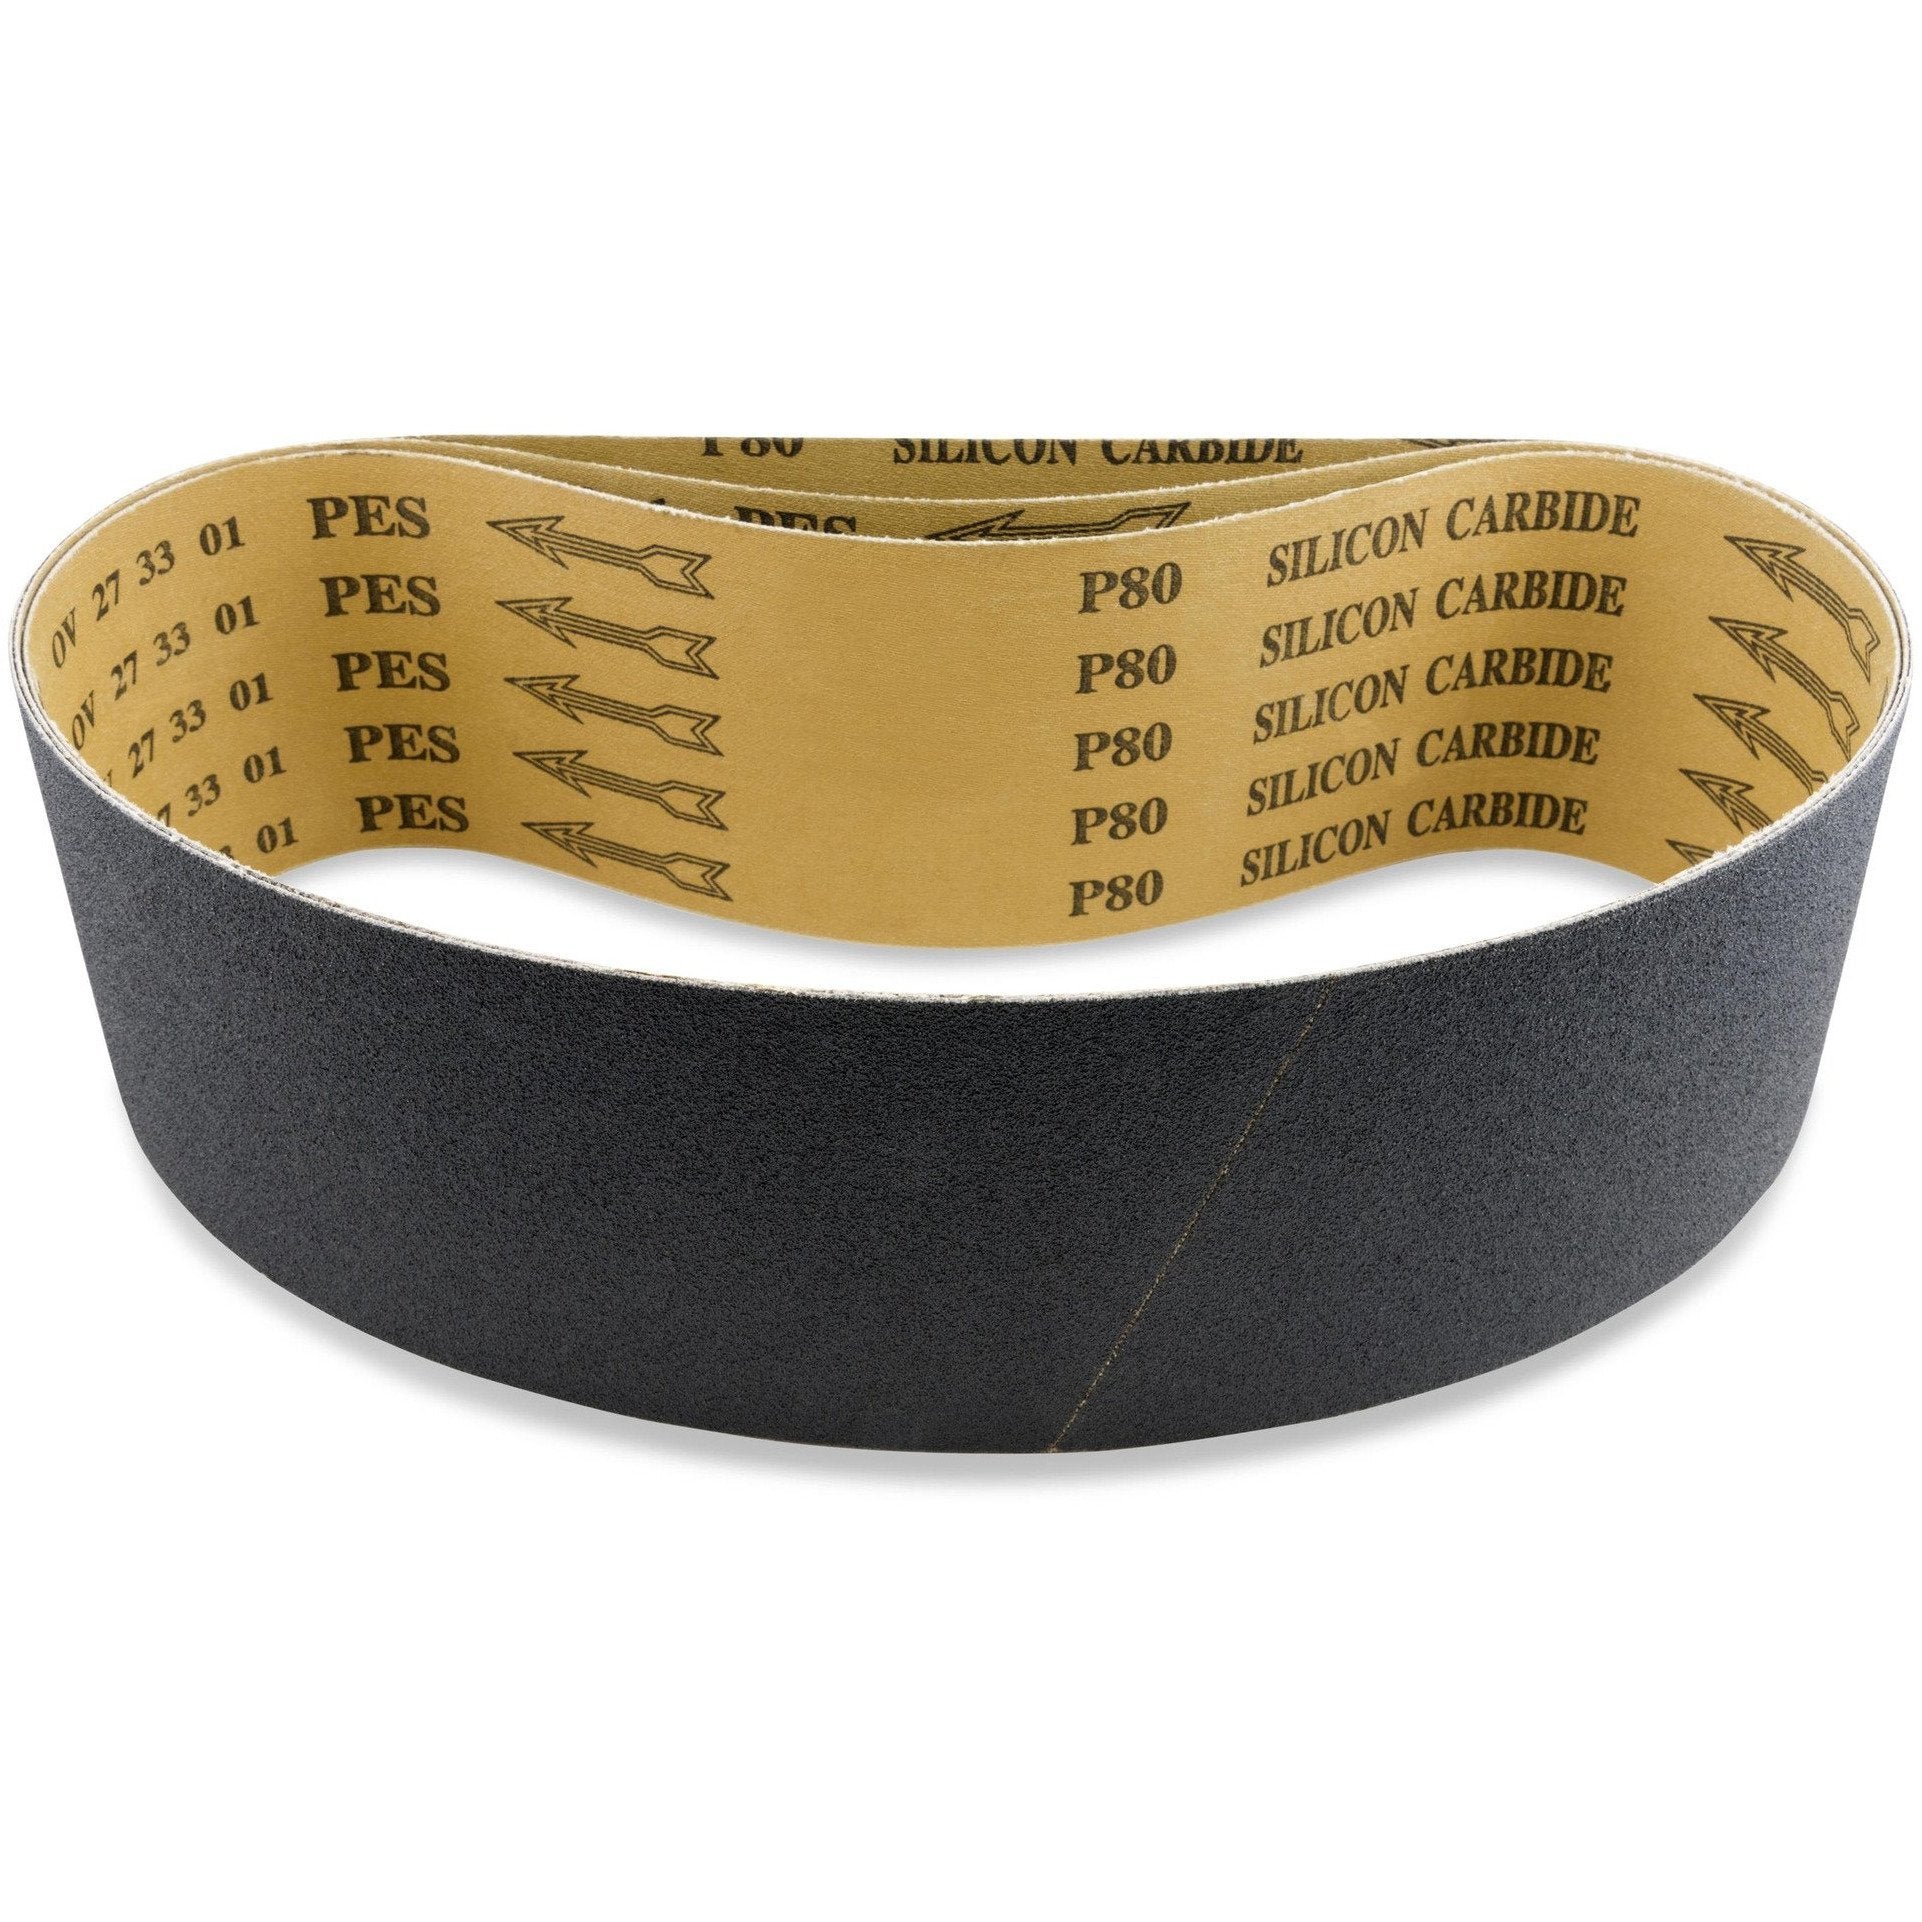 2 X 36 Inch Industrial Grade Silicon Carbide Sanding Belts, 6 Pack - Red Label Abrasives